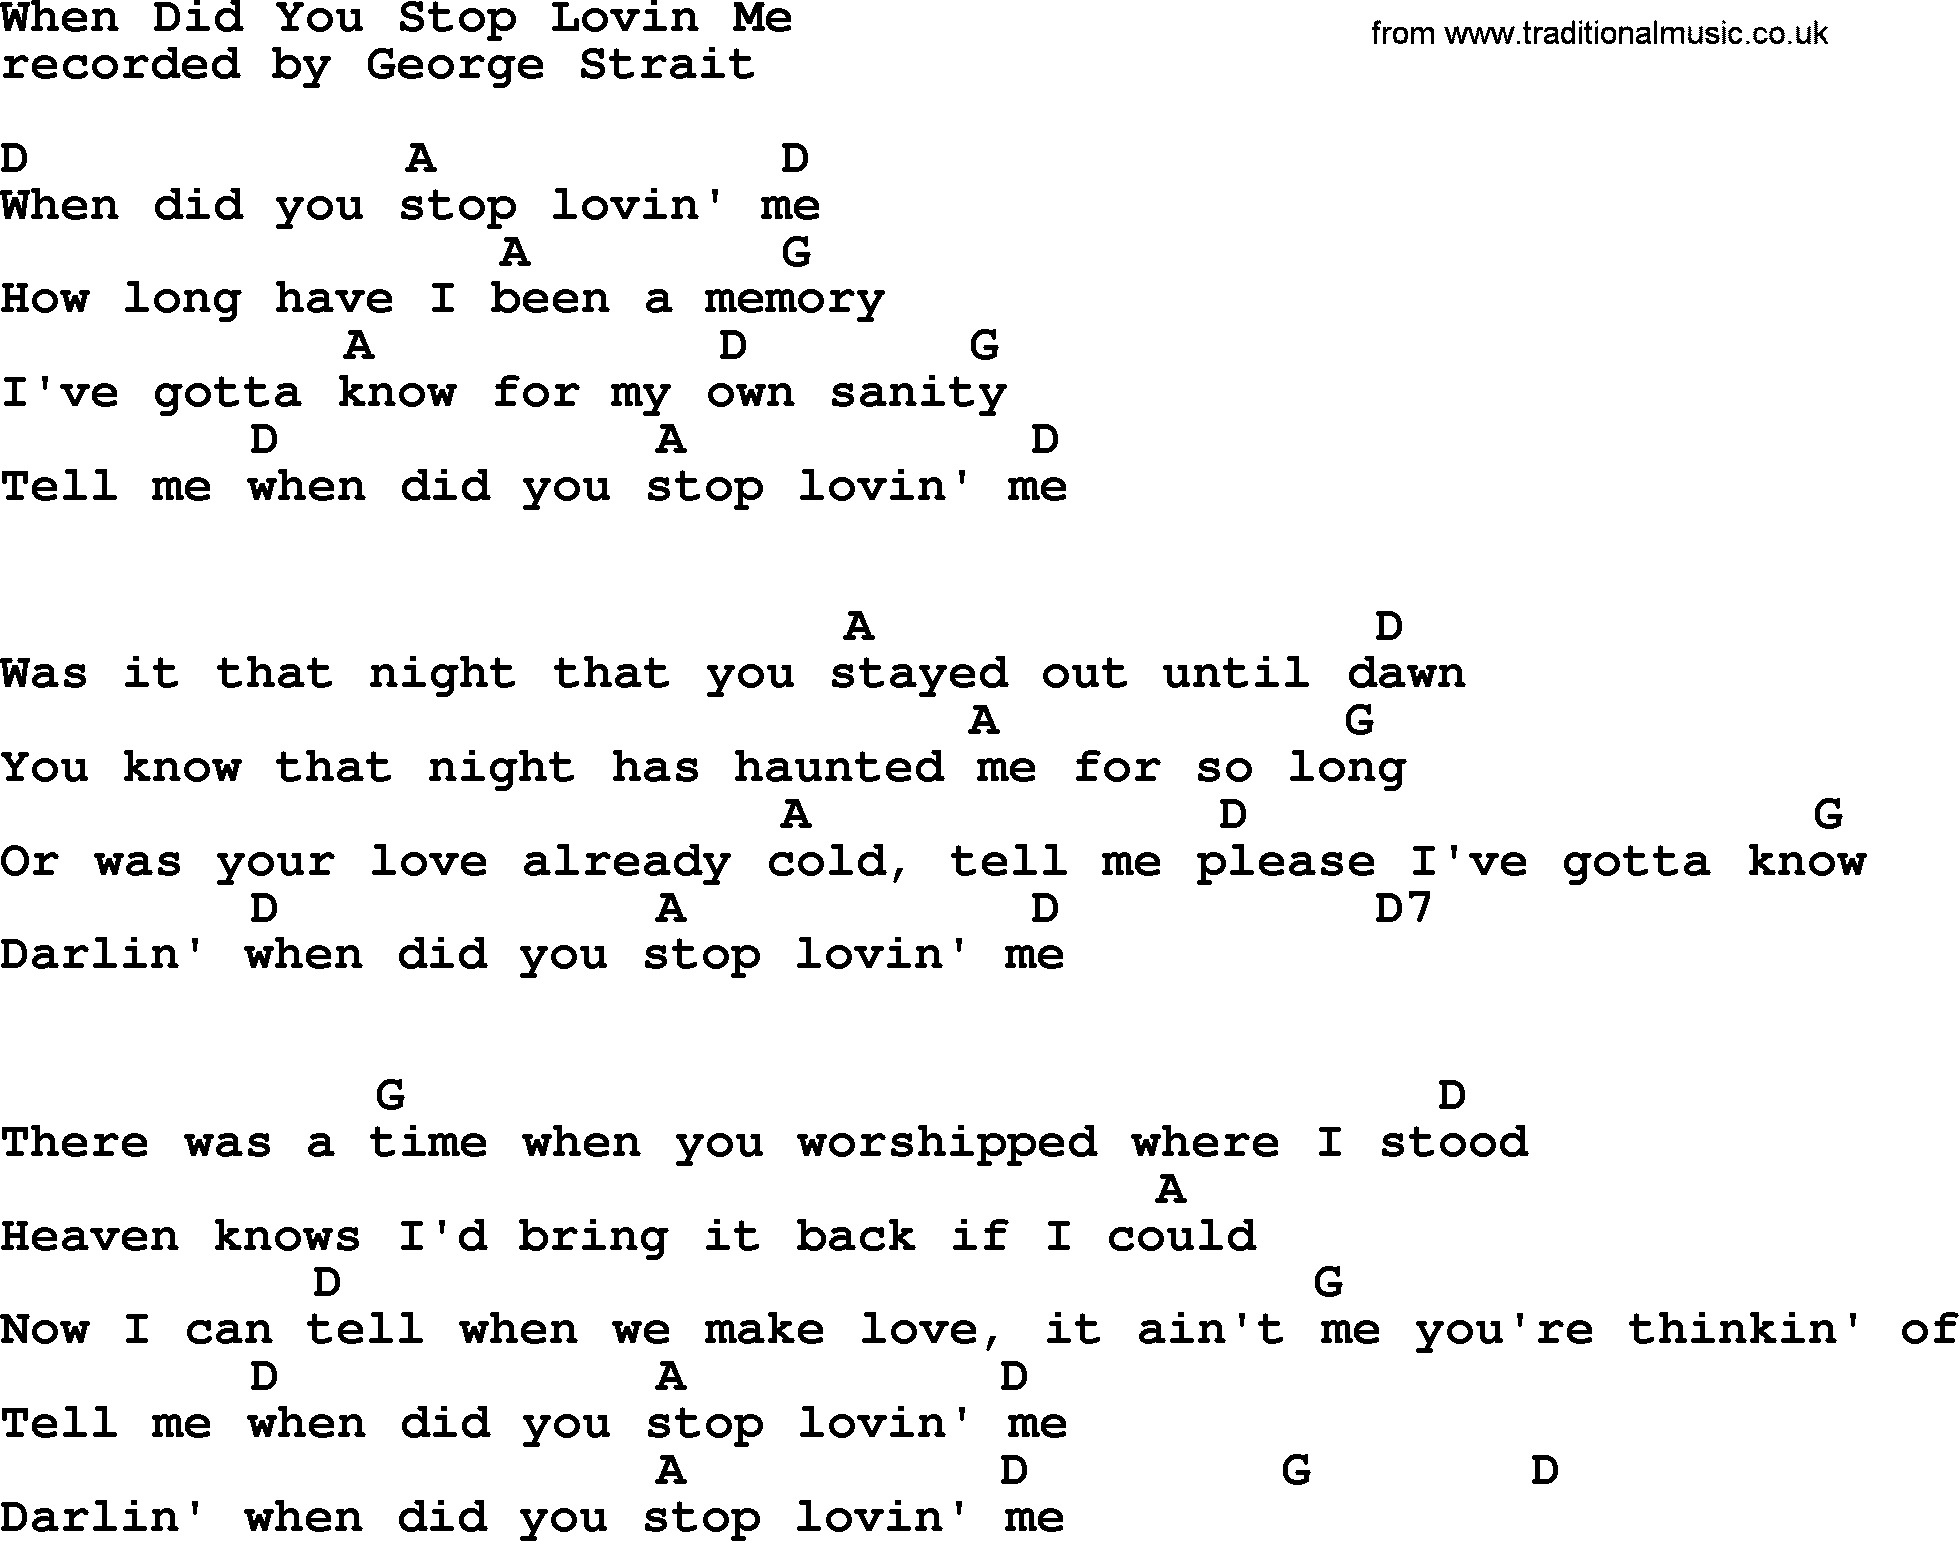 George Strait song: When Did You Stop Lovin Me, lyrics and chords